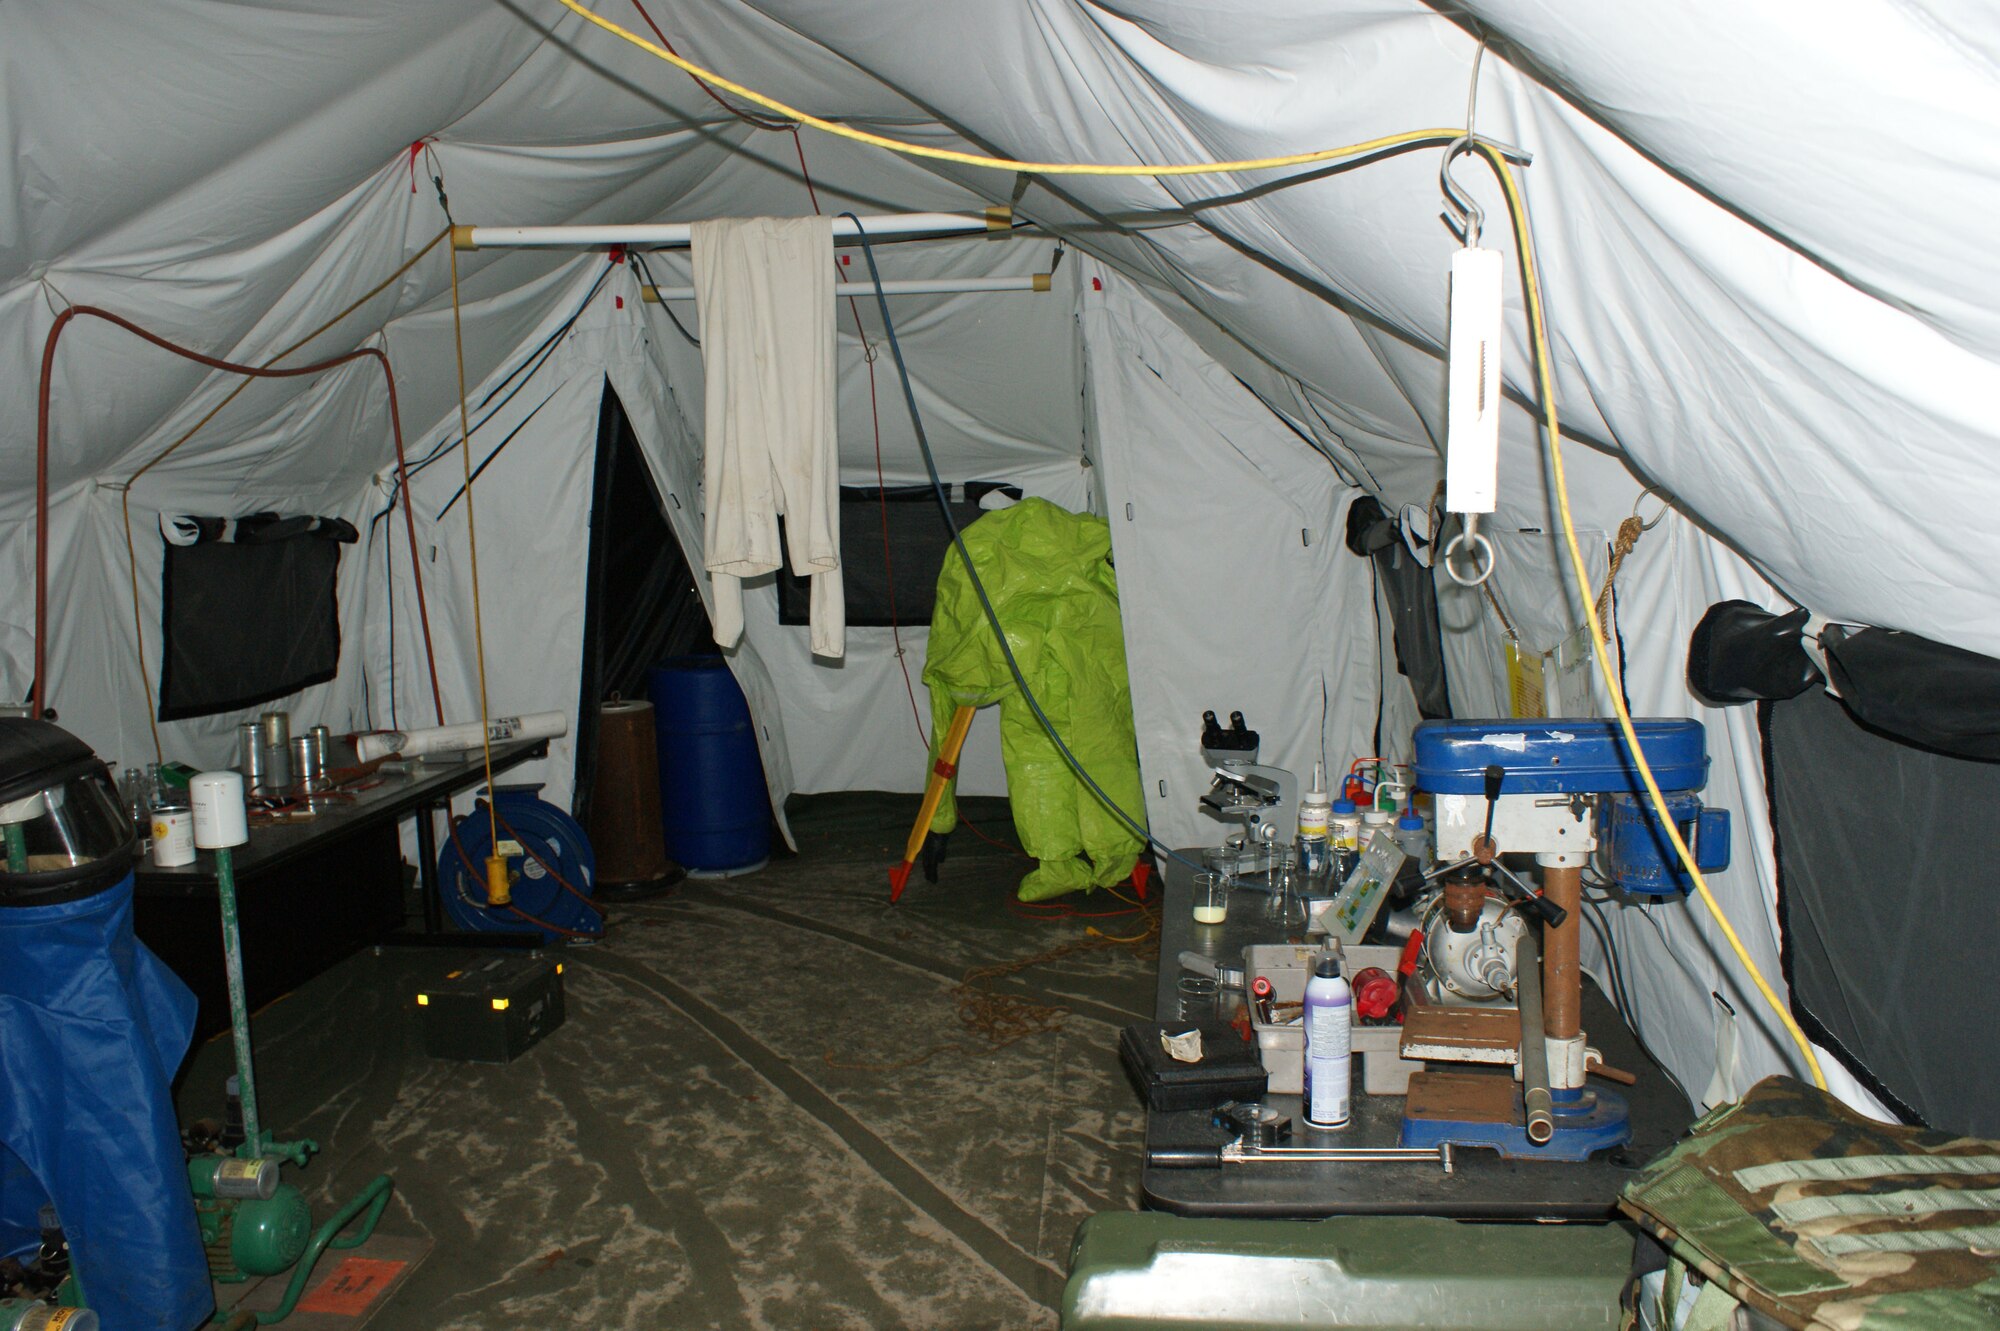 A look inside one of "terrorist" camp tents in one of the Weapons of Mass Destruction Division training areas at Naval School Explosive Ordnance Disposal at Eglin Air Force Base, Fla., July 20, 2012.  The "terrorist" camp was one of multiple projects completed by the NAVSCOLEOD staff utilizing recyclable materials from the Defense Reutilization and Marketing Service and other sources. (U.S. Air Force photo/Dan Hawkins)